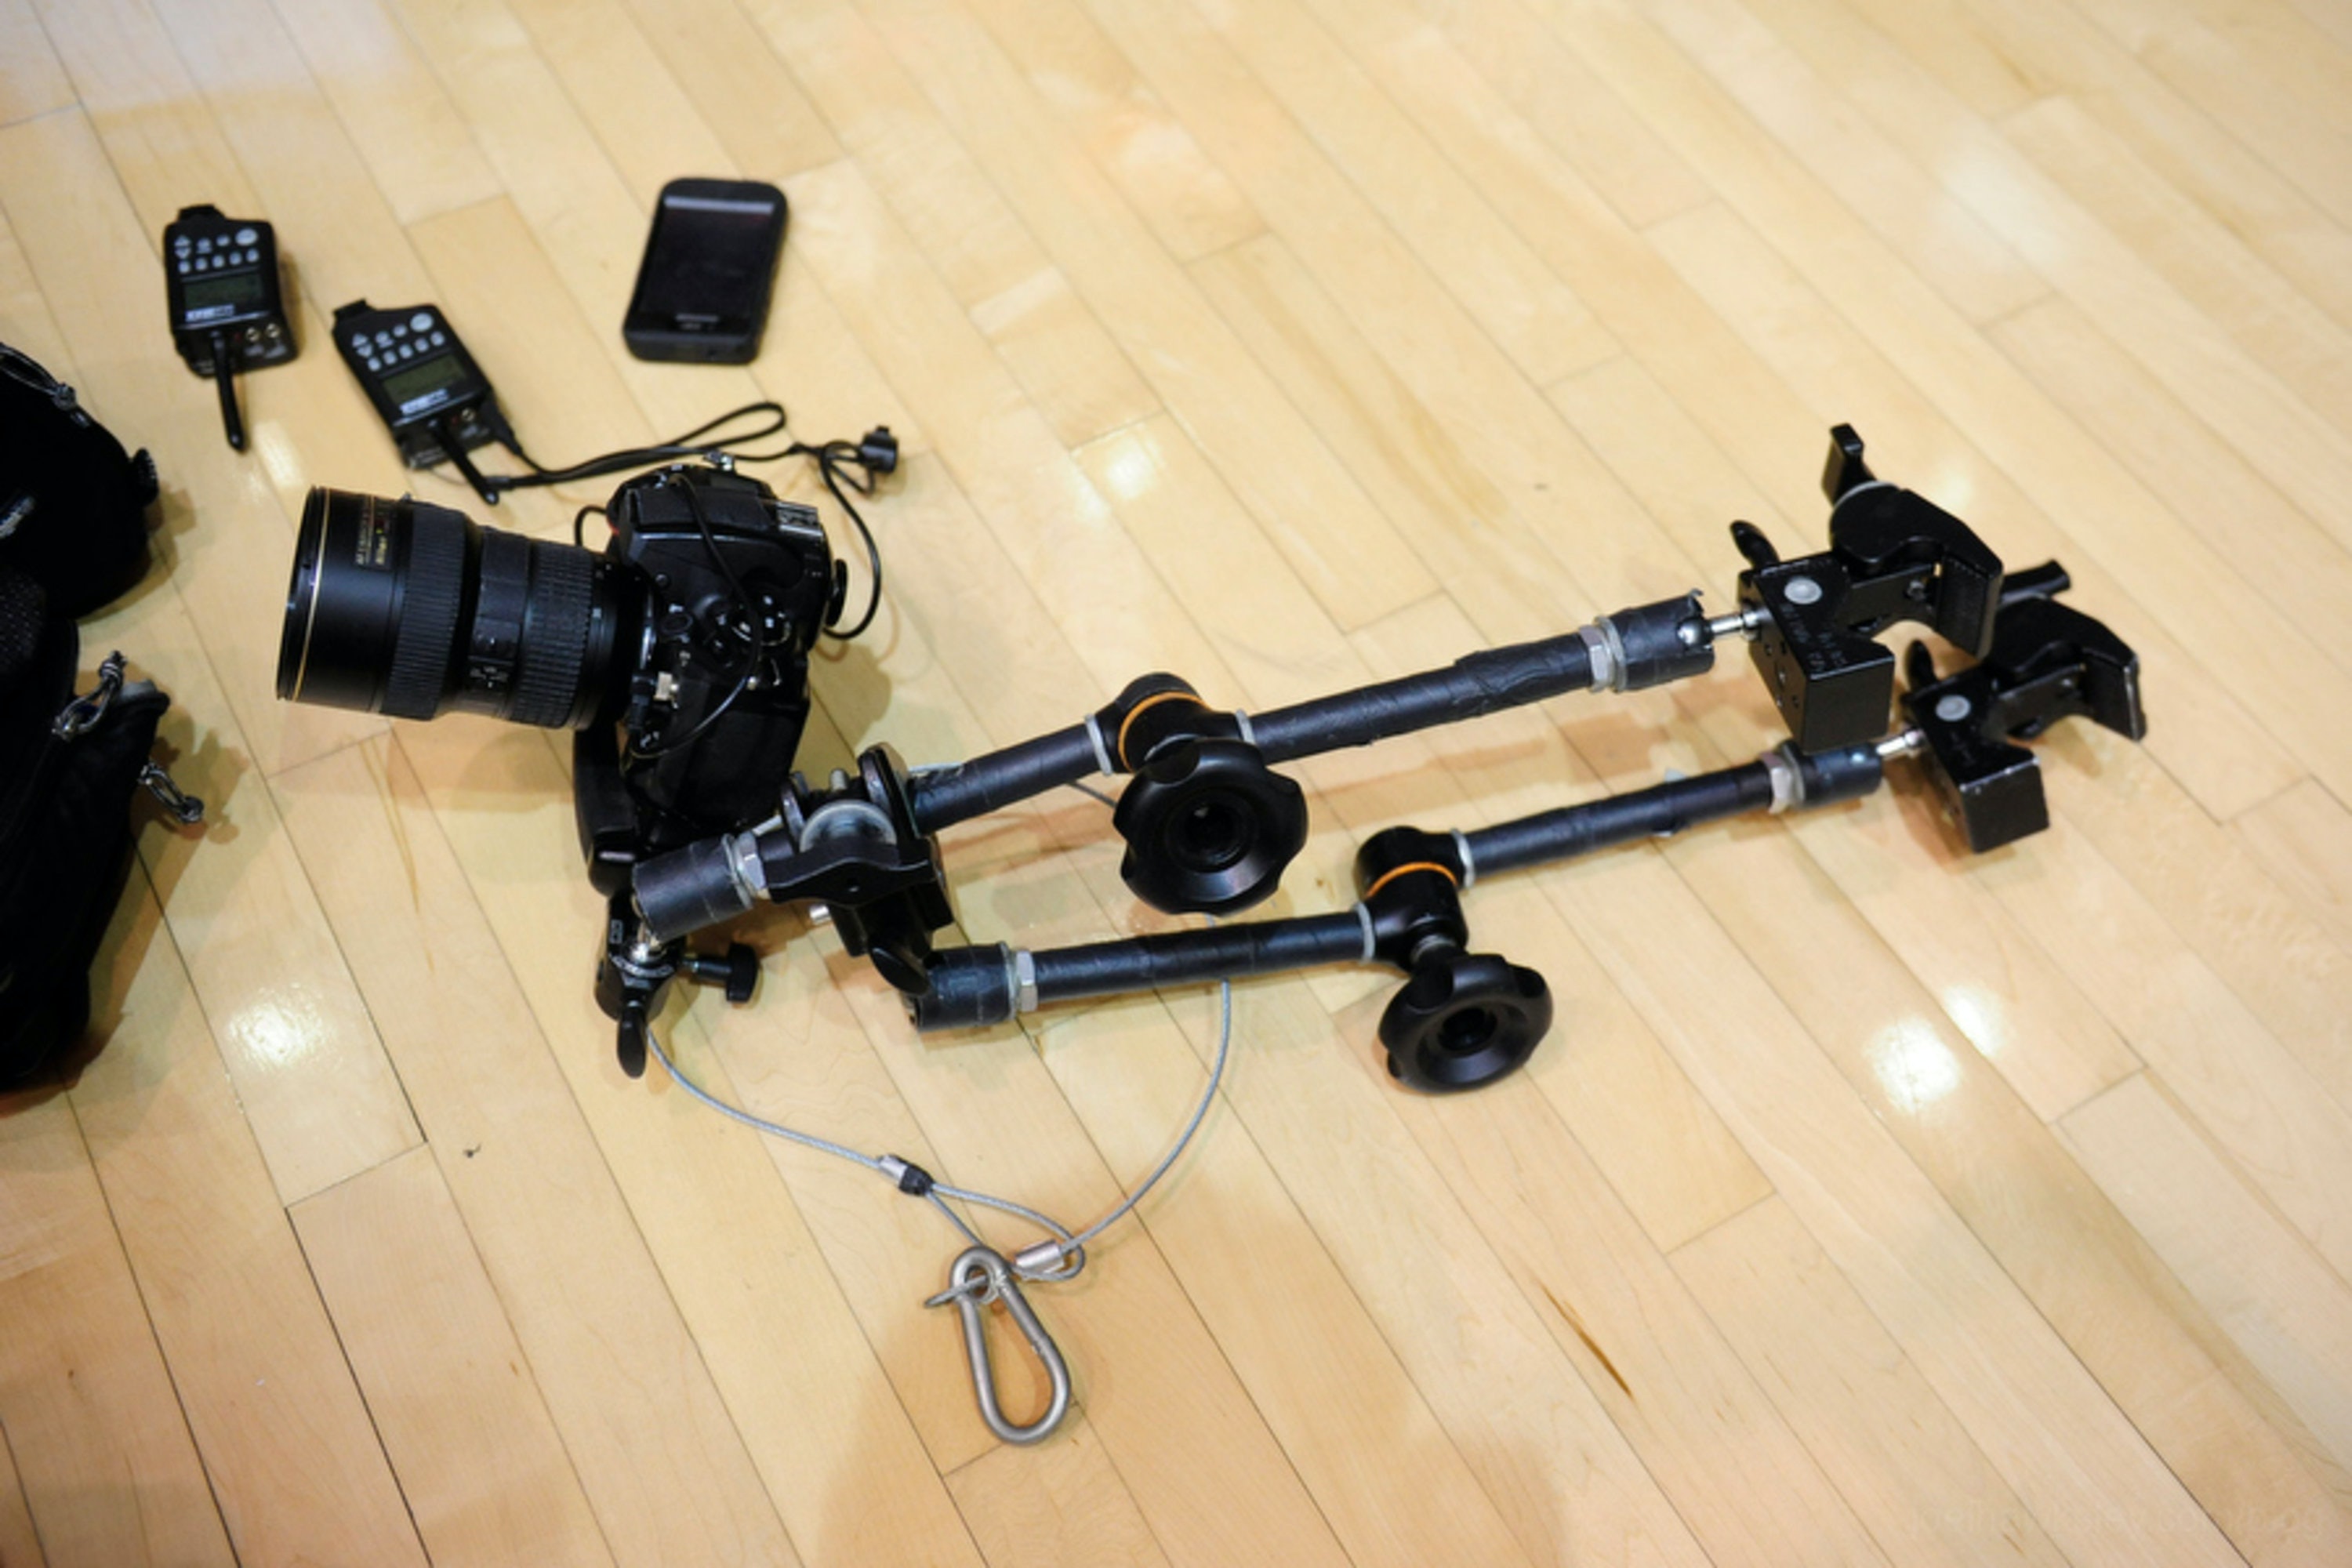 A camera mounted to a set of magic arms